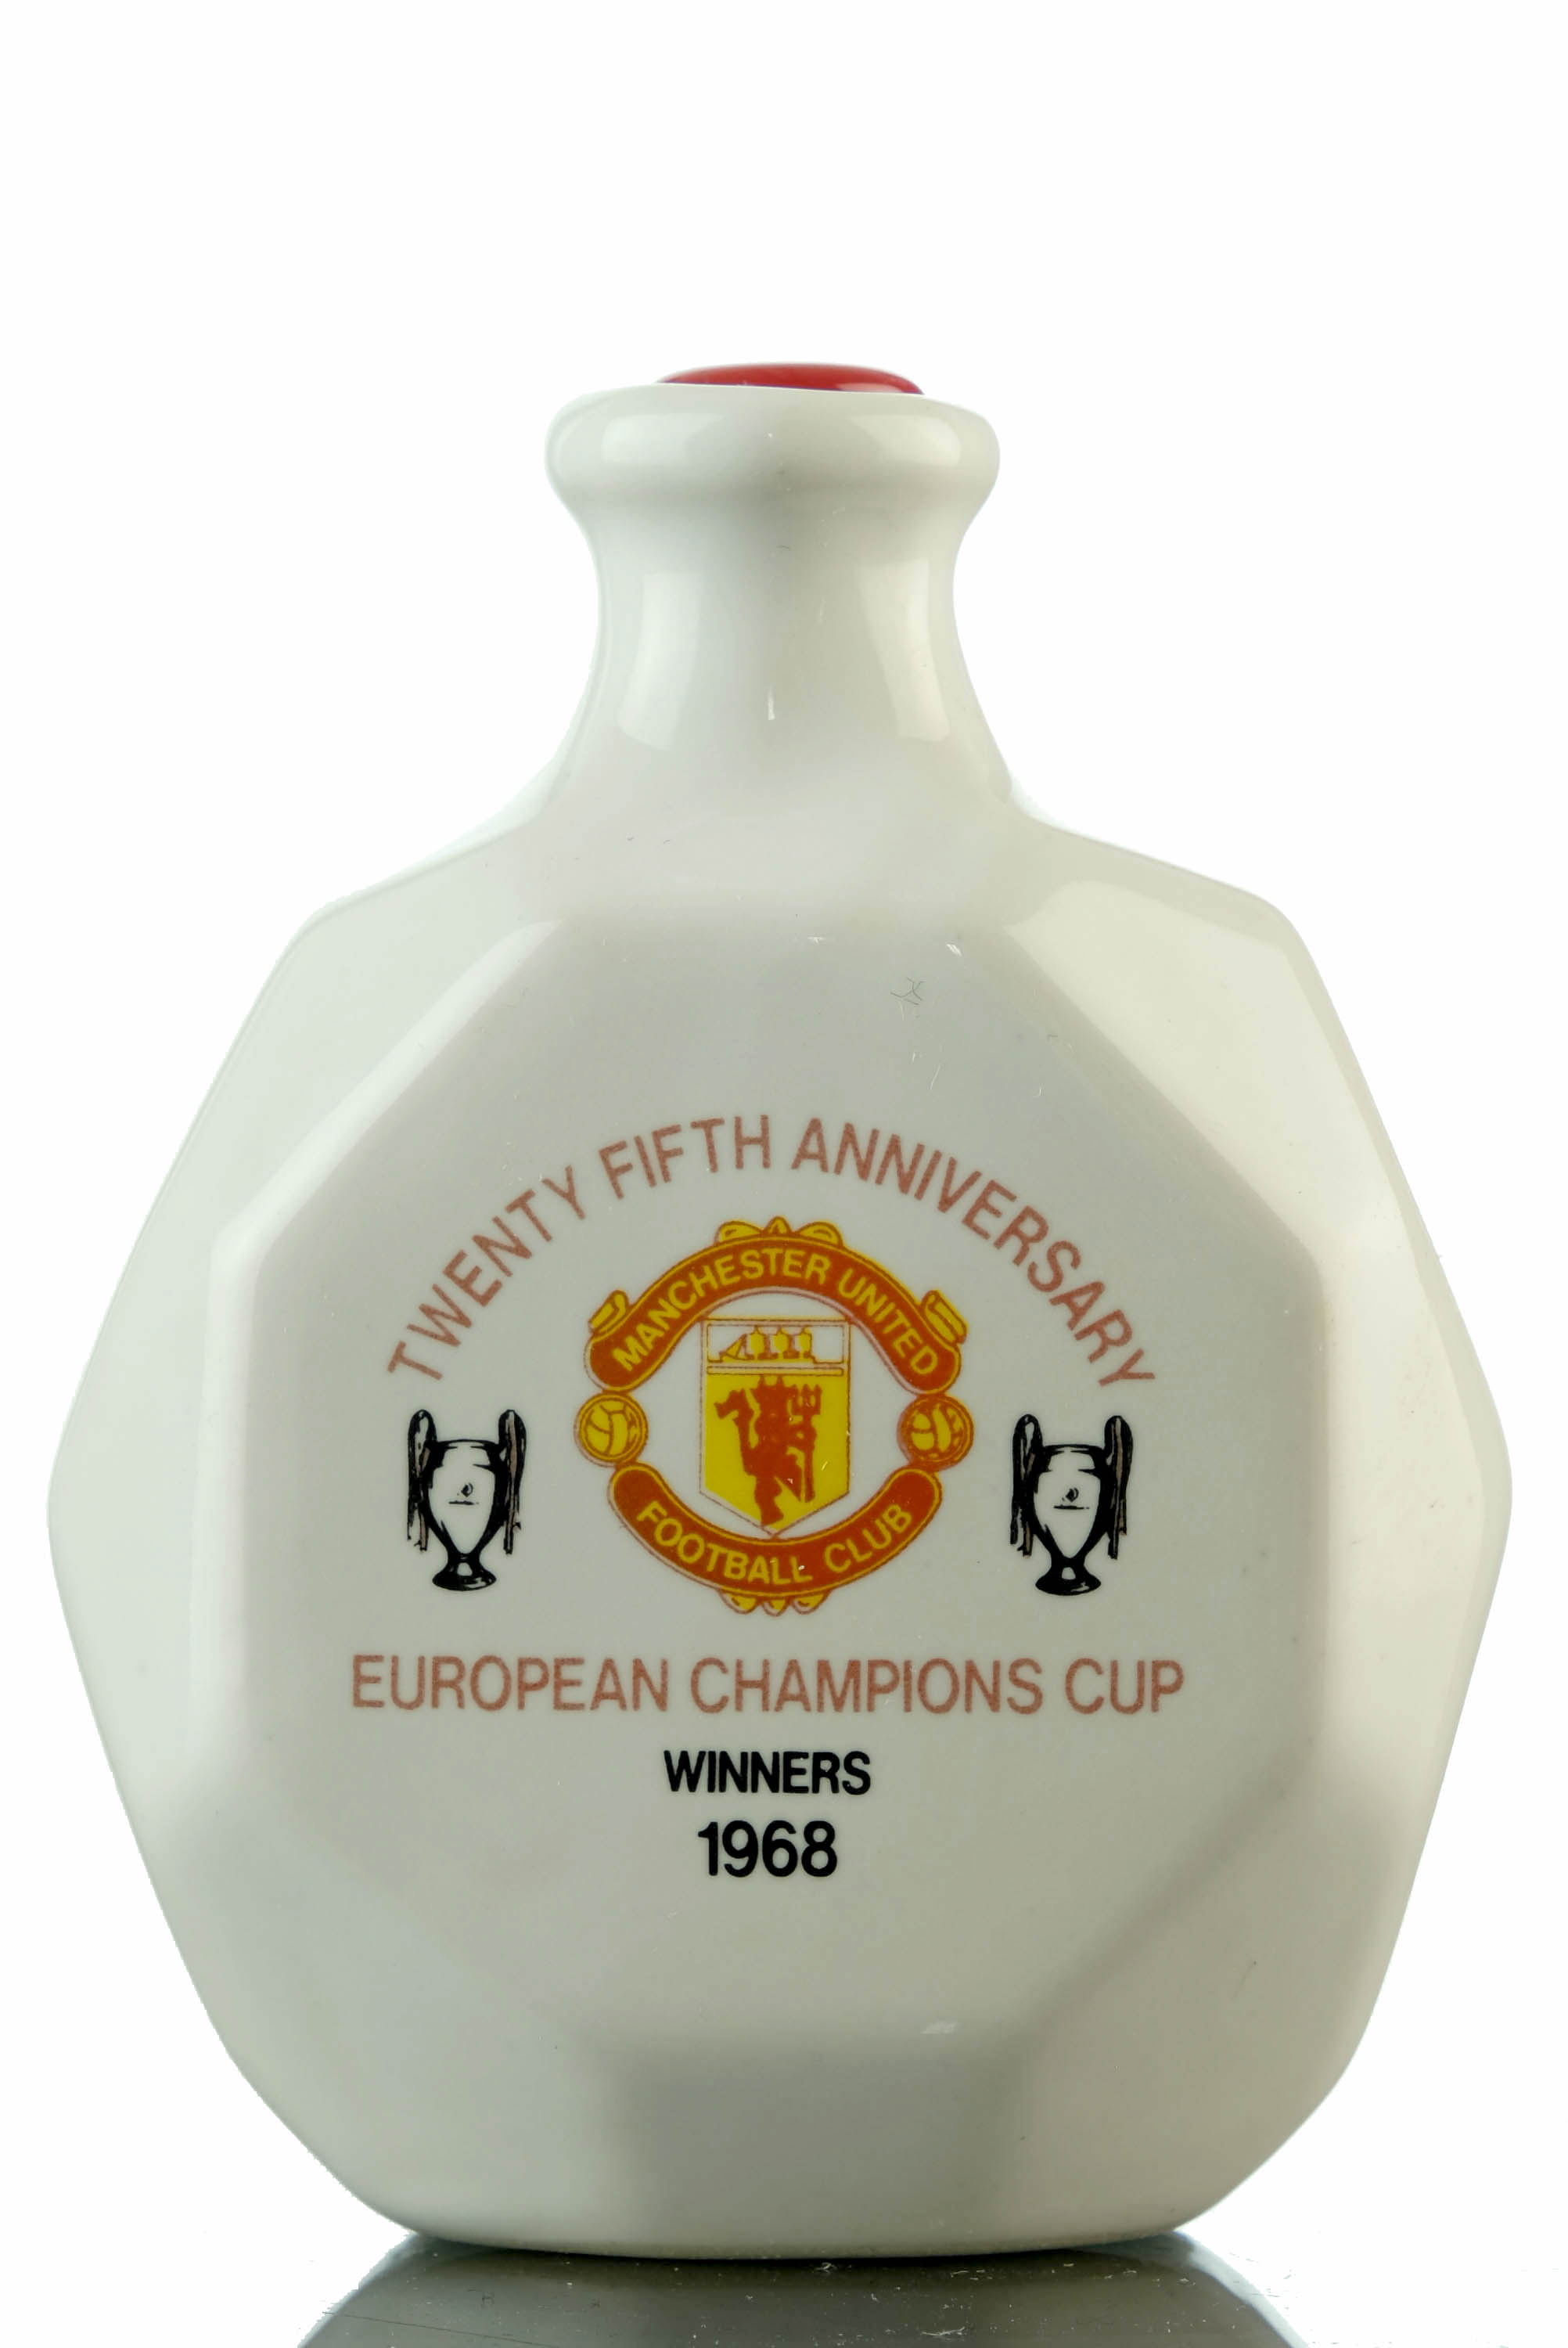 George Best Manchester United European Champions Cup Winners 1968 Miniature